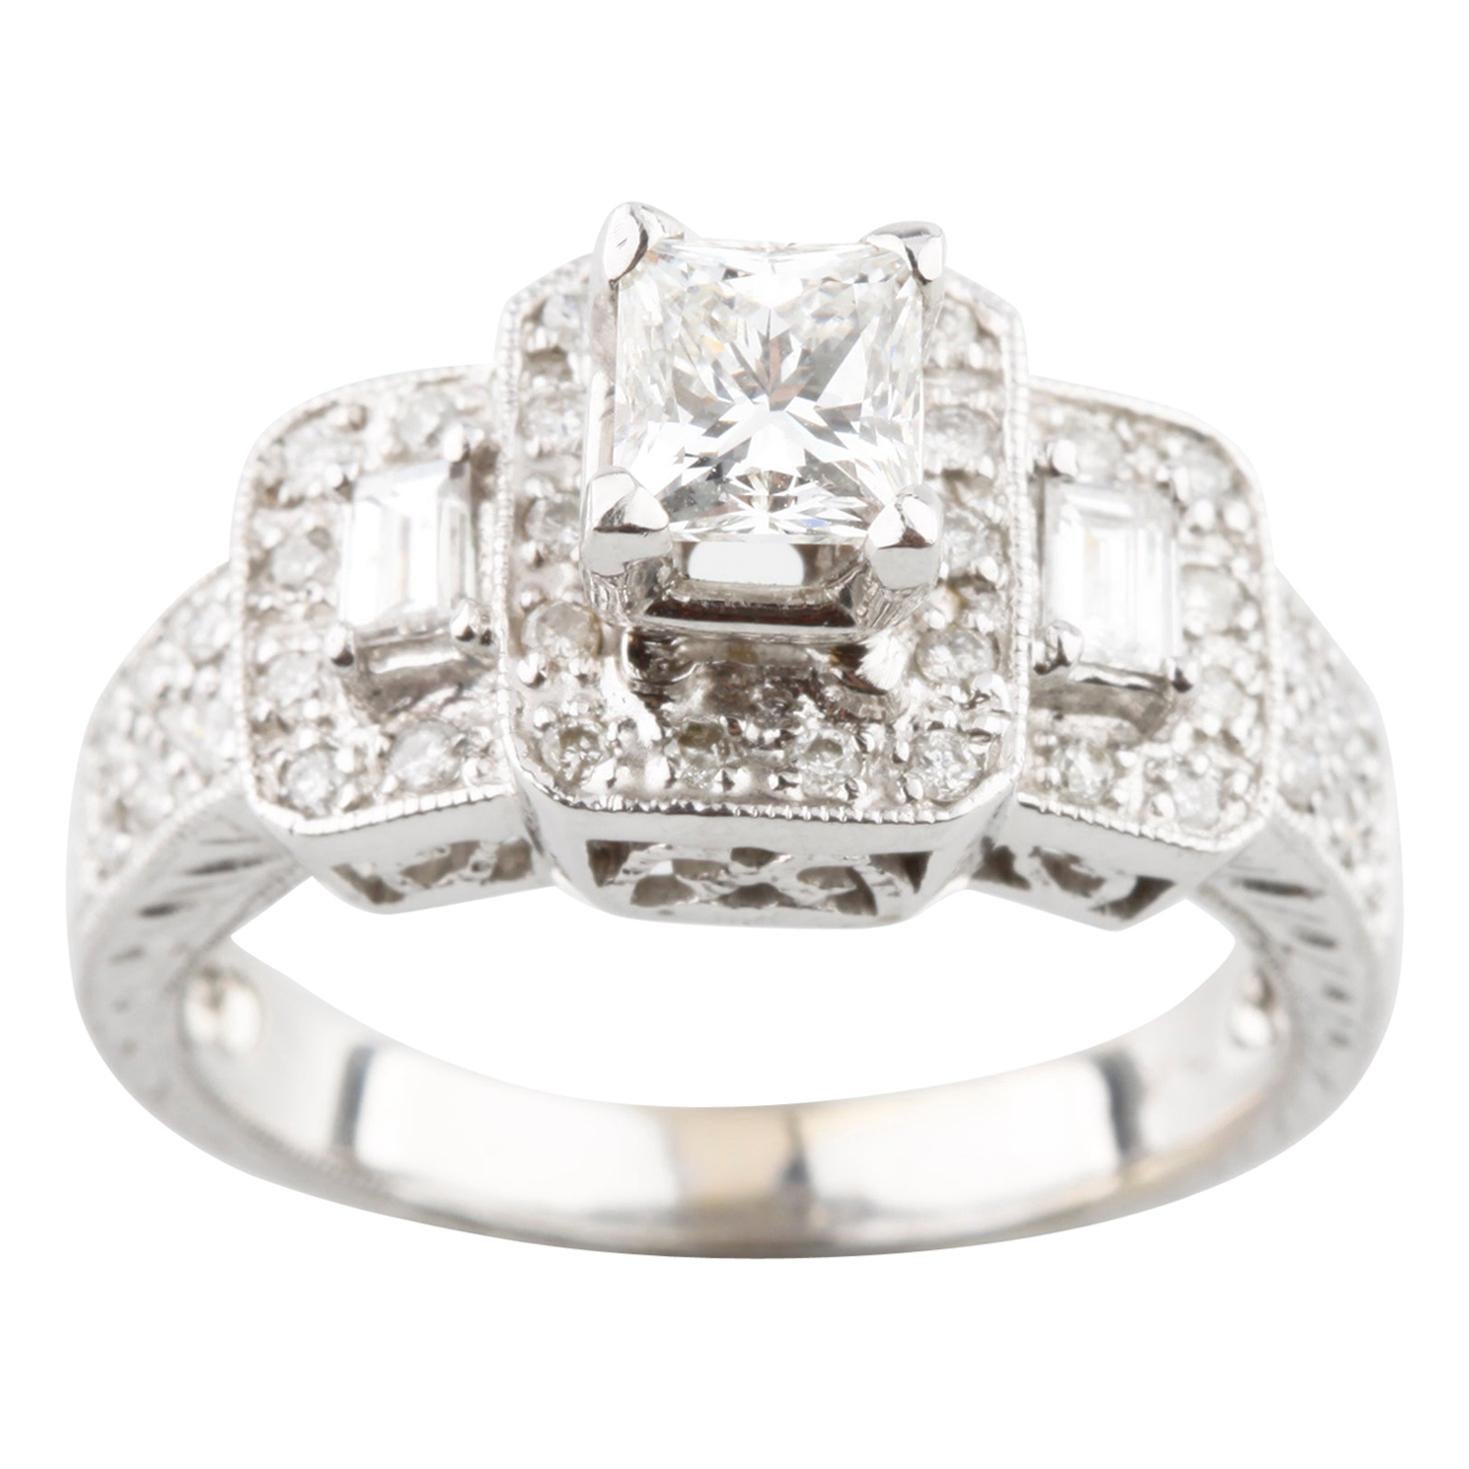 0.50 Carat Diamond Solitaire Three-Stone Ring in White Gold